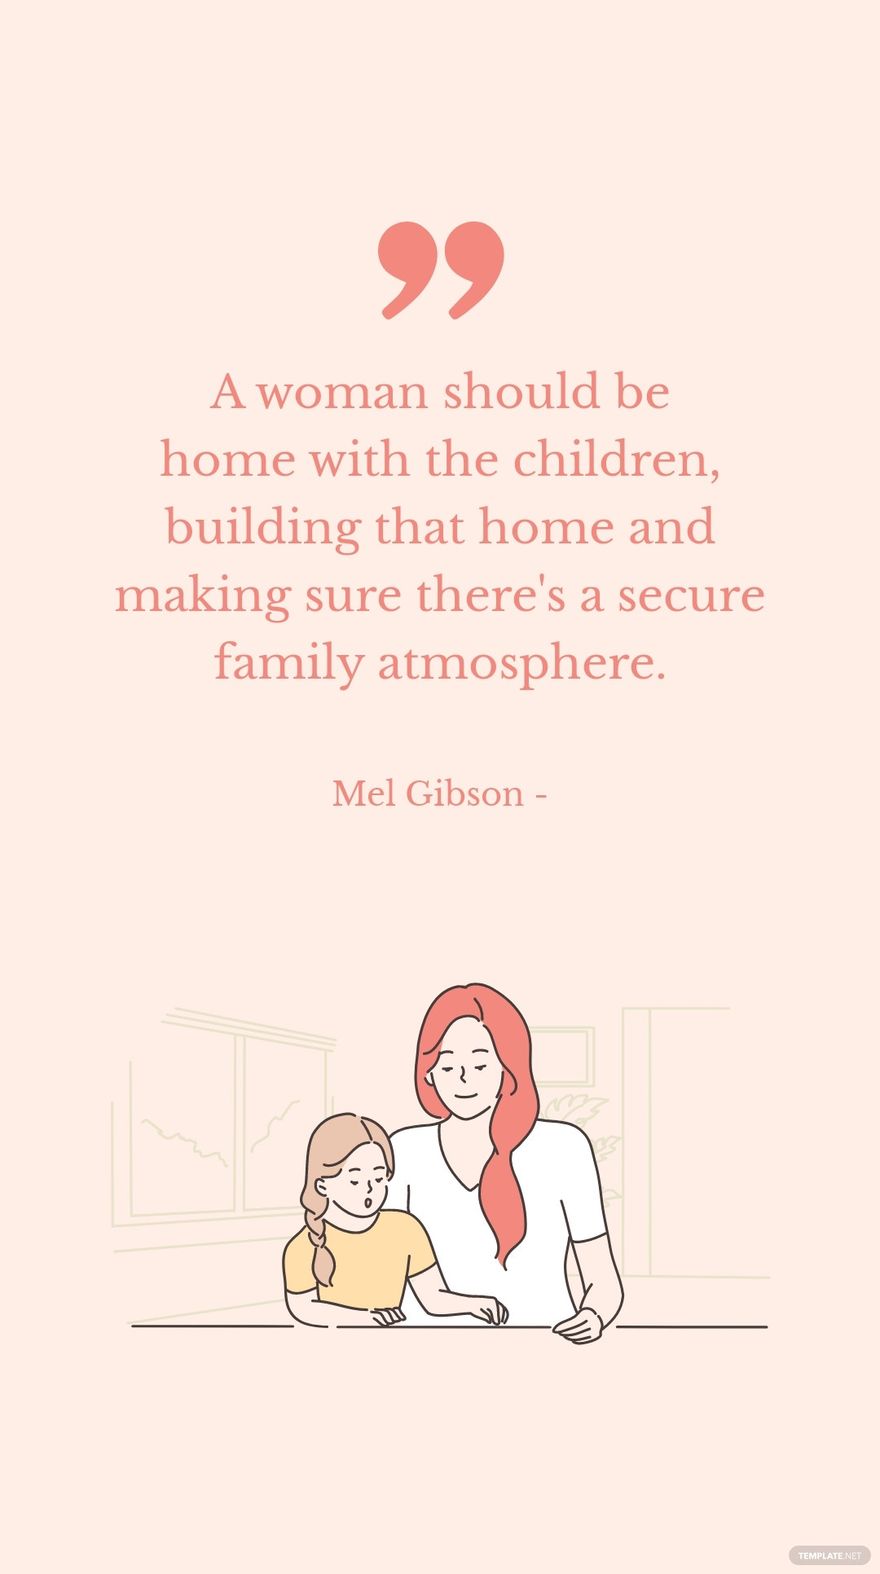 Mel Gibson - A woman should be home with the children, building that home and making sure there's a secure family atmosphere.